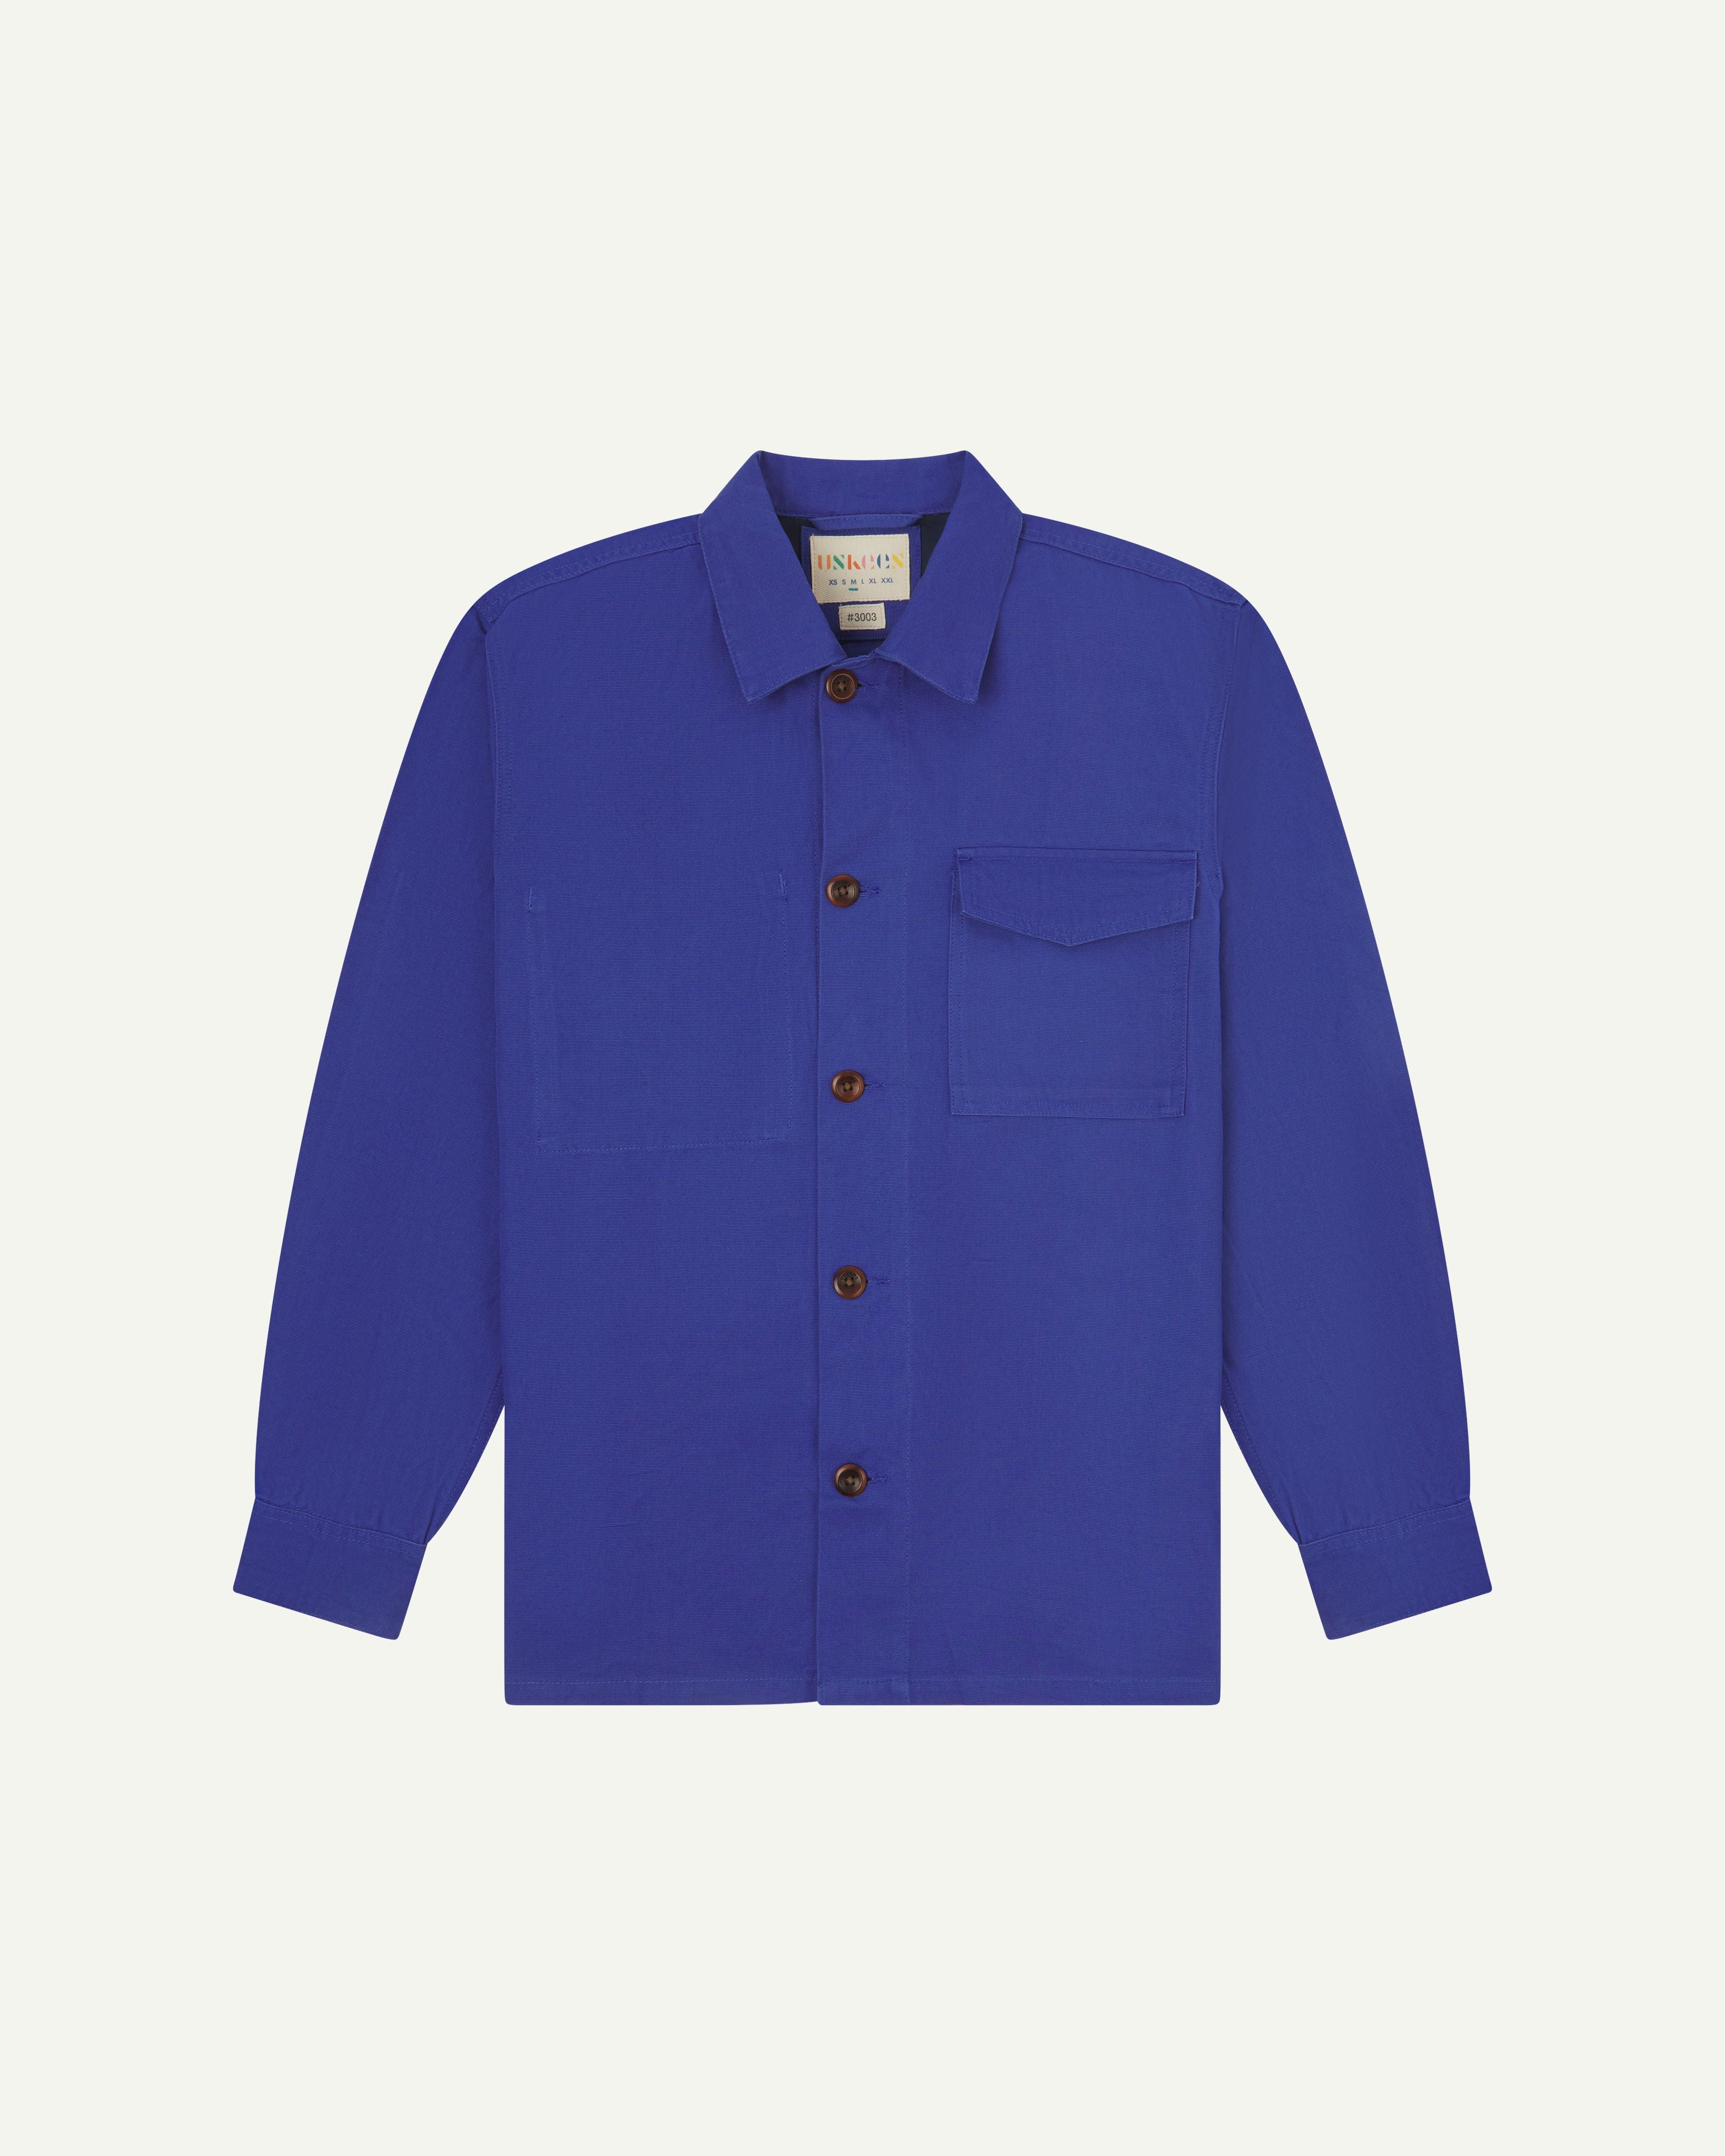 Front flat shot of ultra blue buttoned 3003 workshirt from Uskees. Showing chest pocket with flap and corozo buttons.